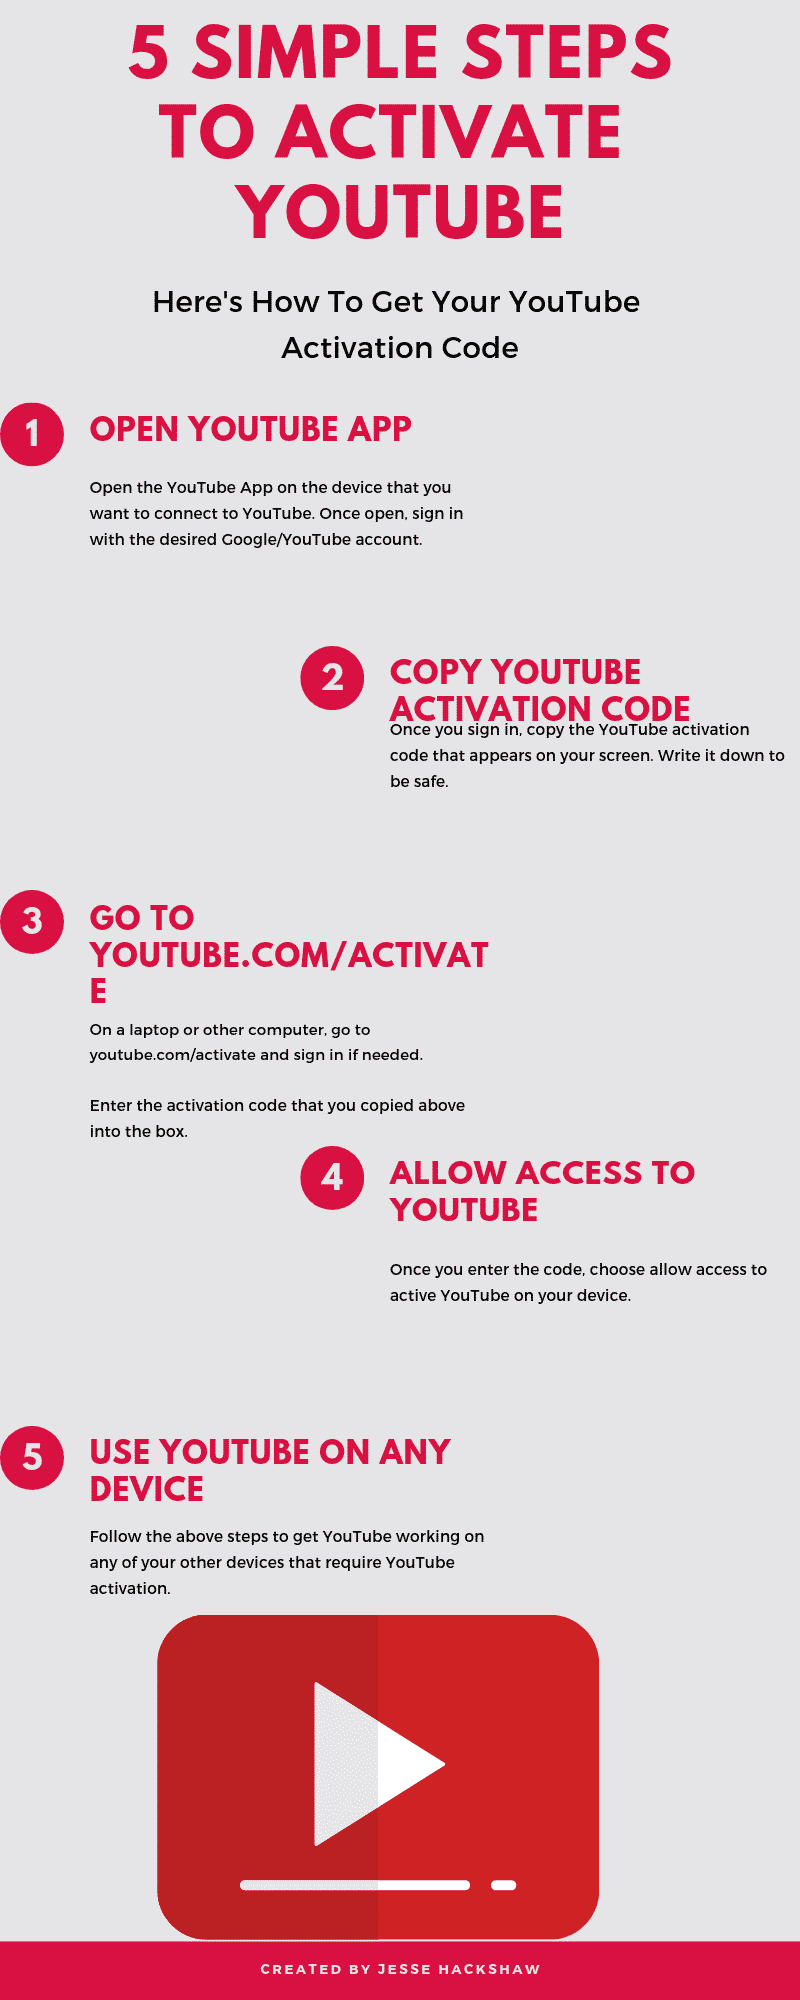 How to Activate YouTube using Youtube.com/activate